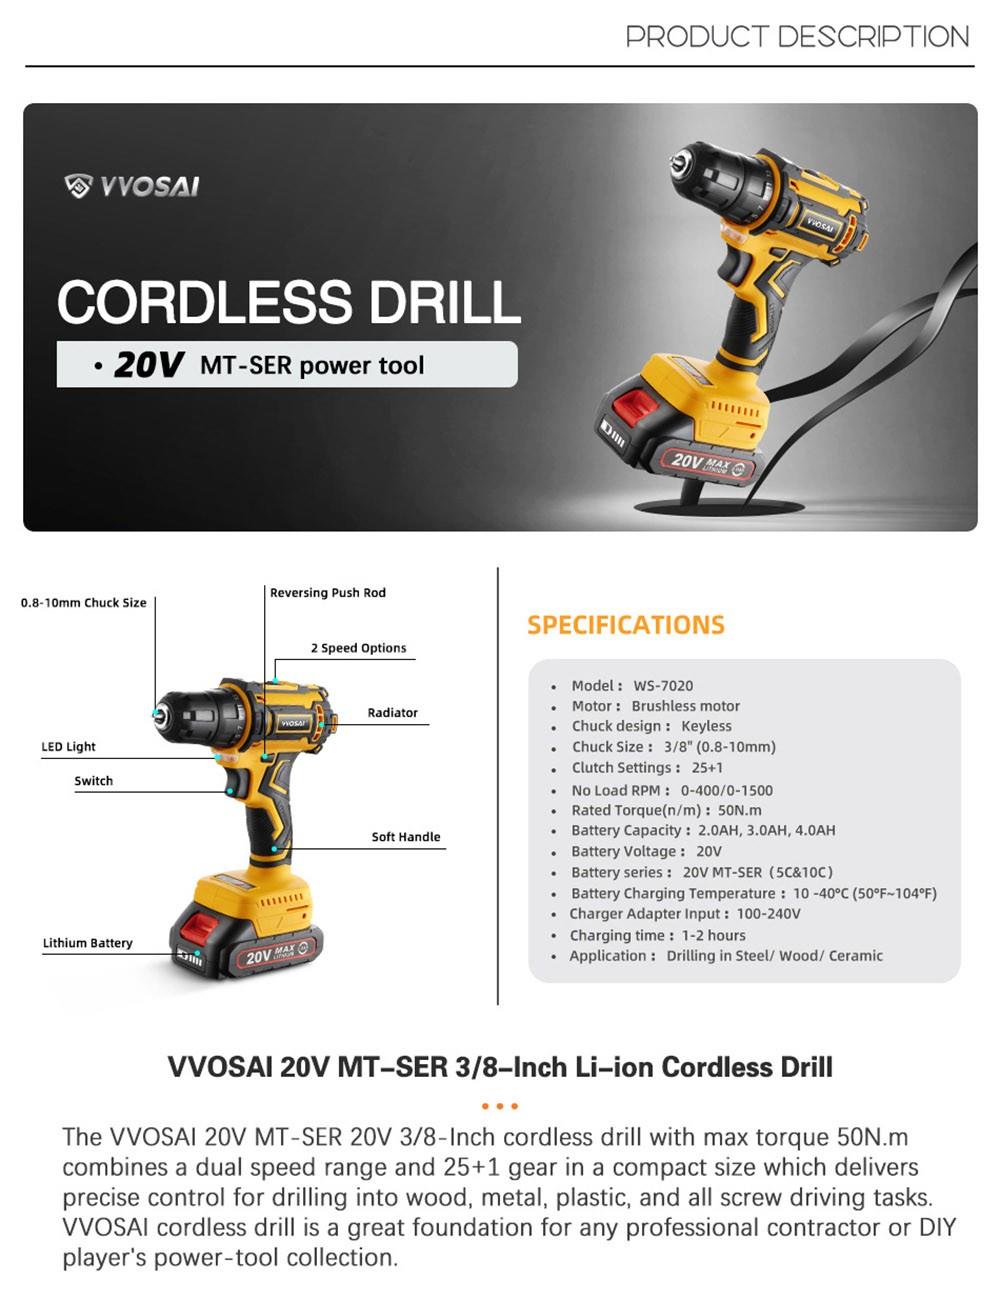 VVOSAI WS-7020-B1 20V Cordless Drill Electric Screwdriver, 3/8 inch Chuck Size, 2 Speed, 50N.m Torque, 4.0Ah Battery